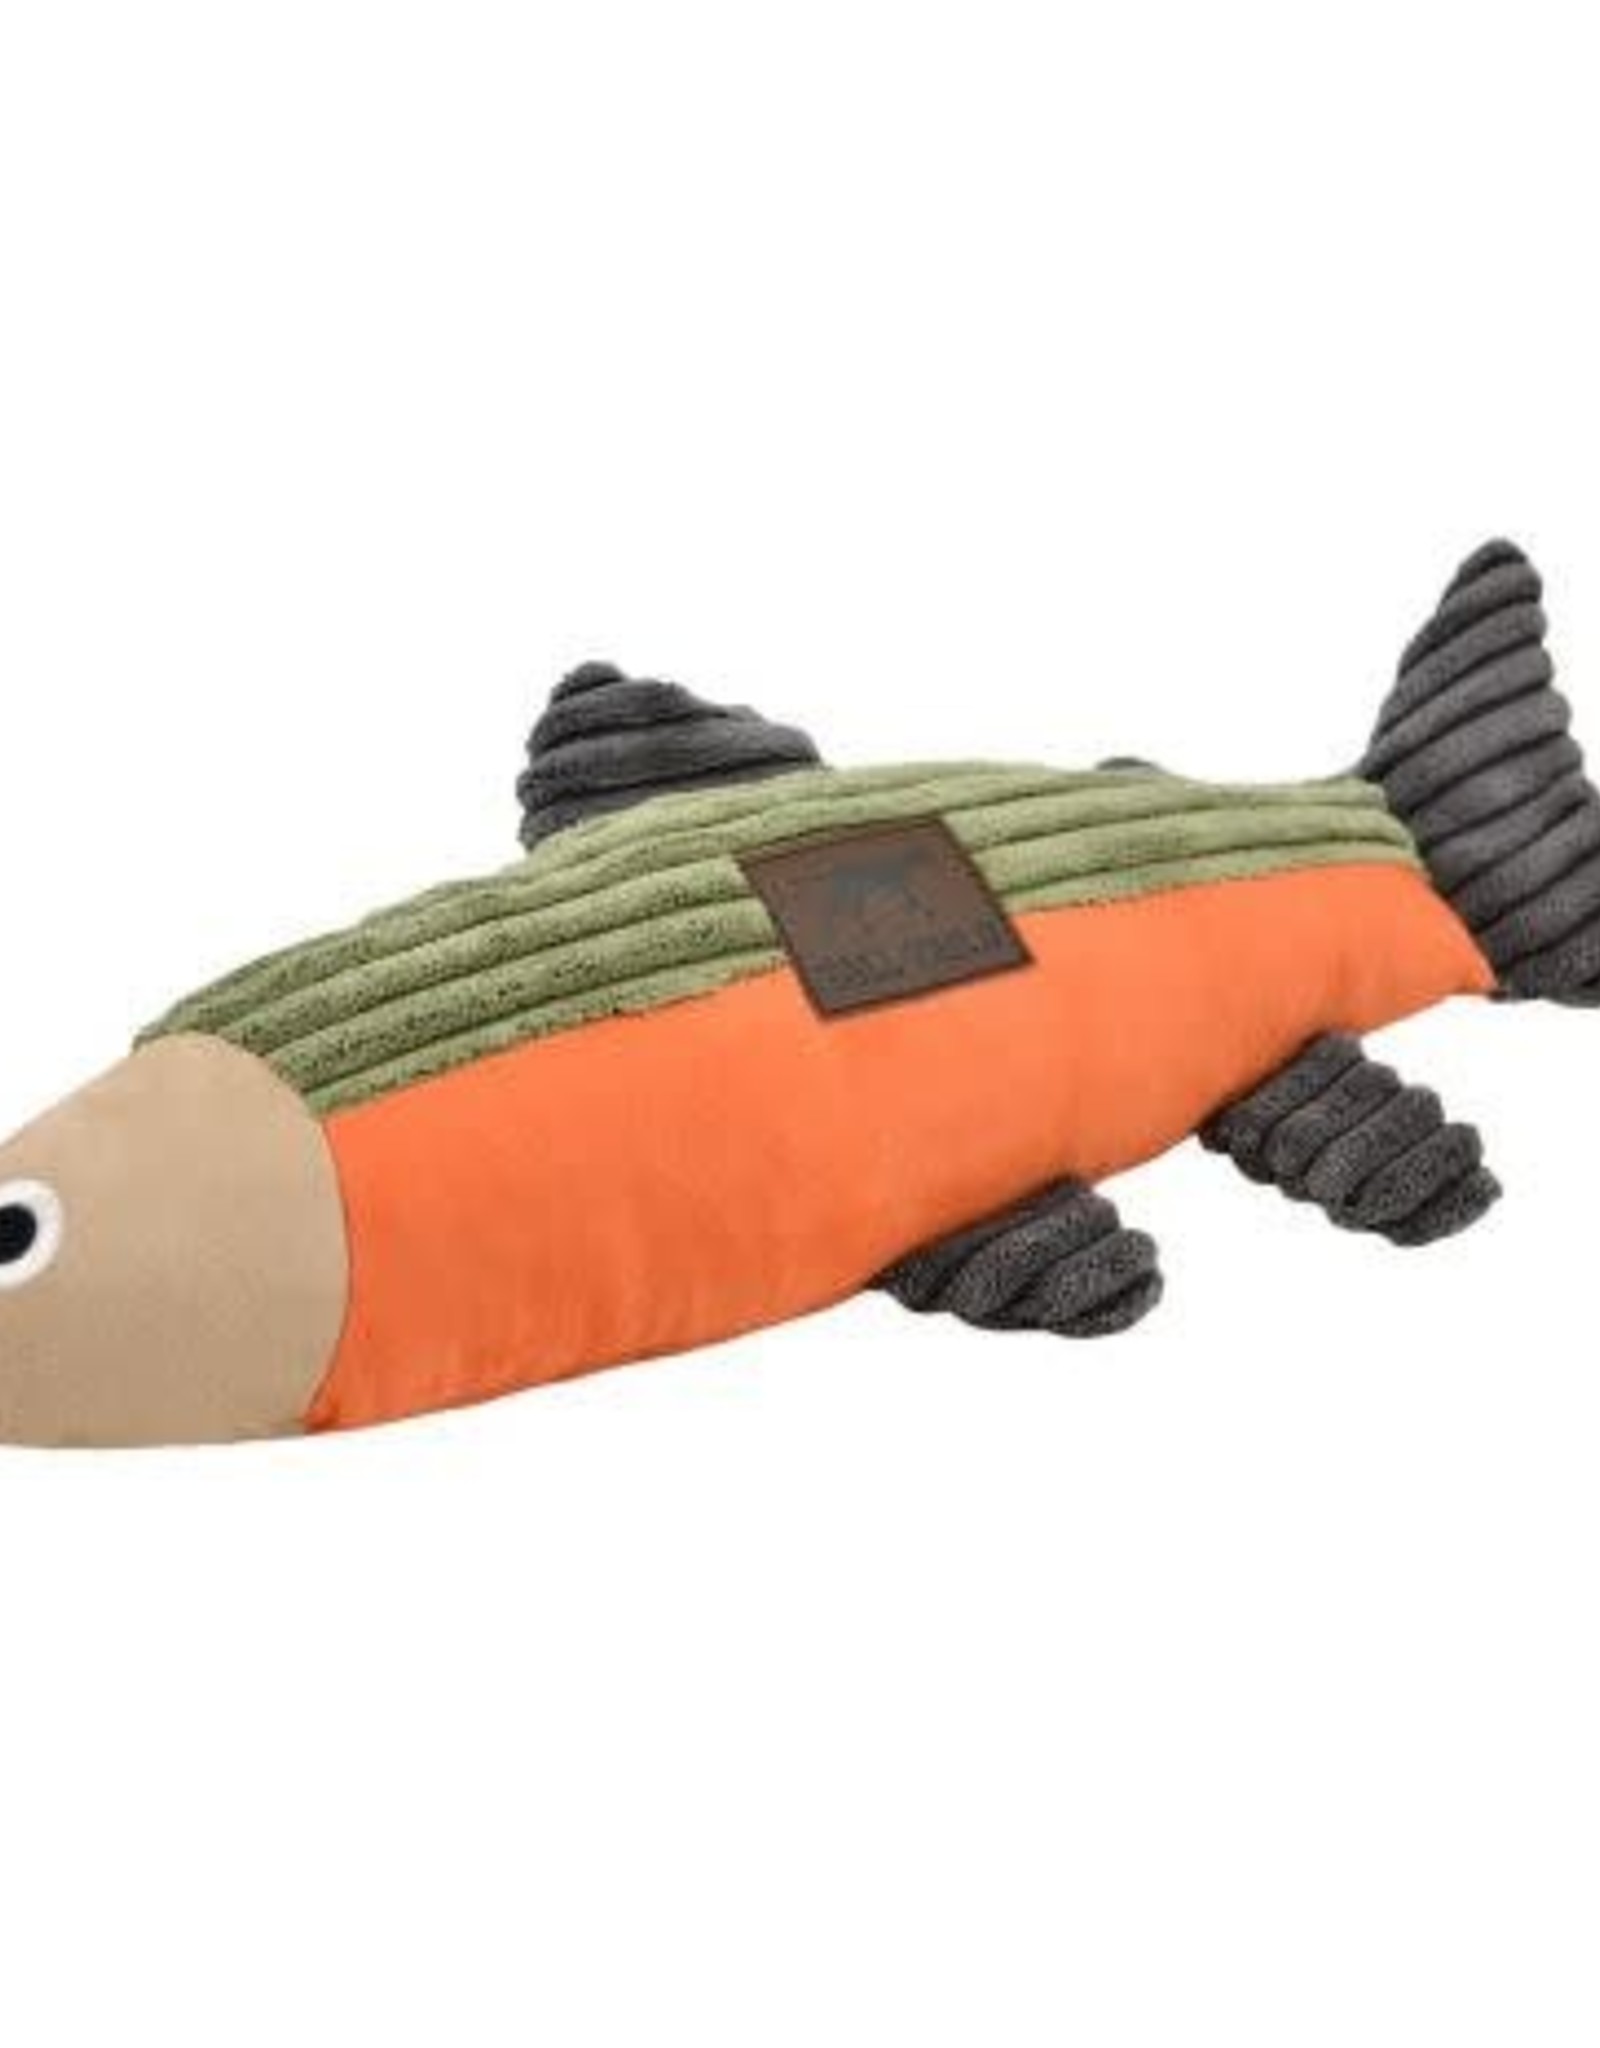 Tall Tails Tall Tails Plush Fish with Squeaker